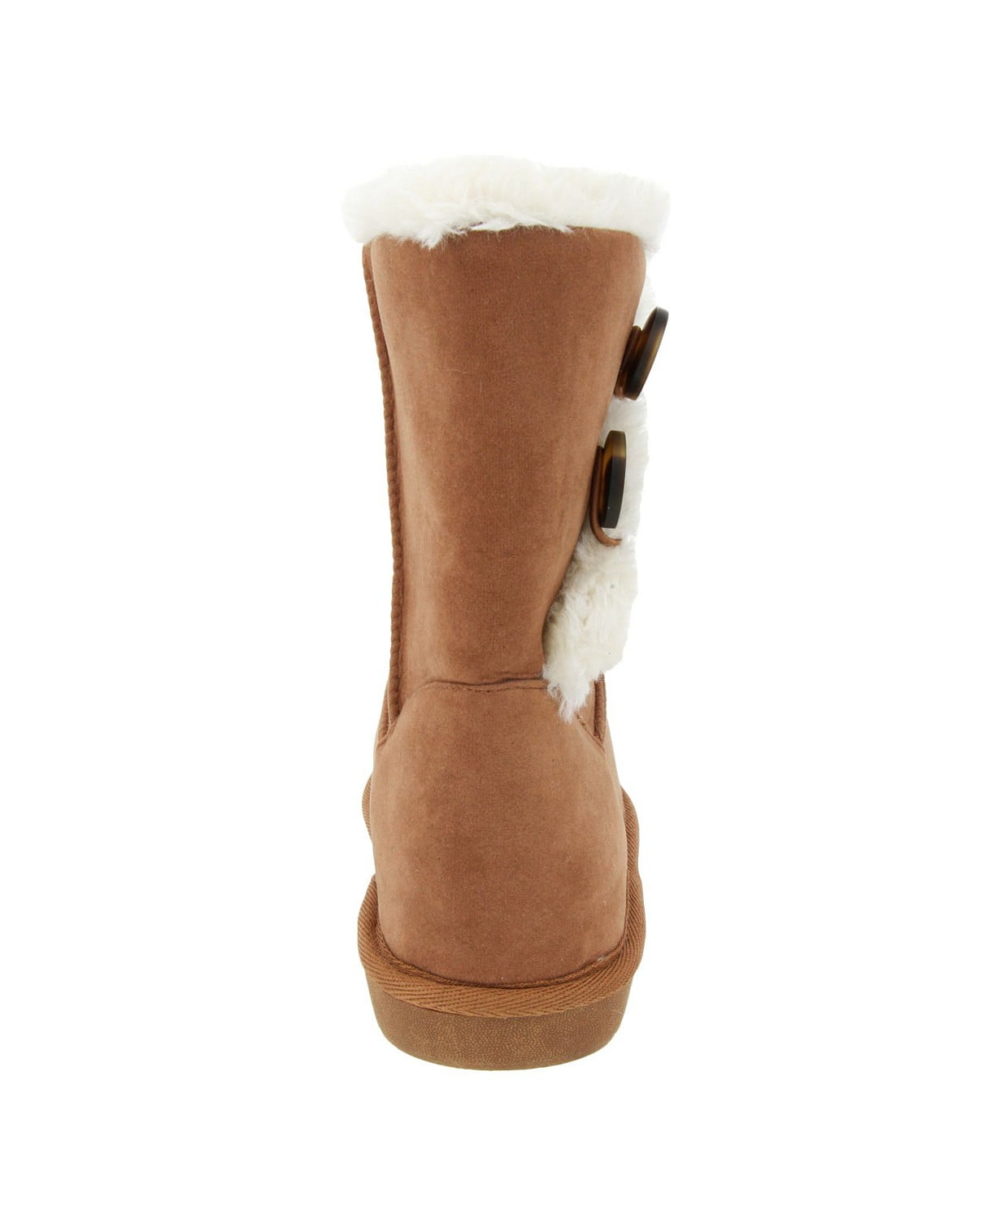 woocommerce-673321-2209615.cloudwaysapps.com-sugar-womens-brown-marty-cozy-winter-boots